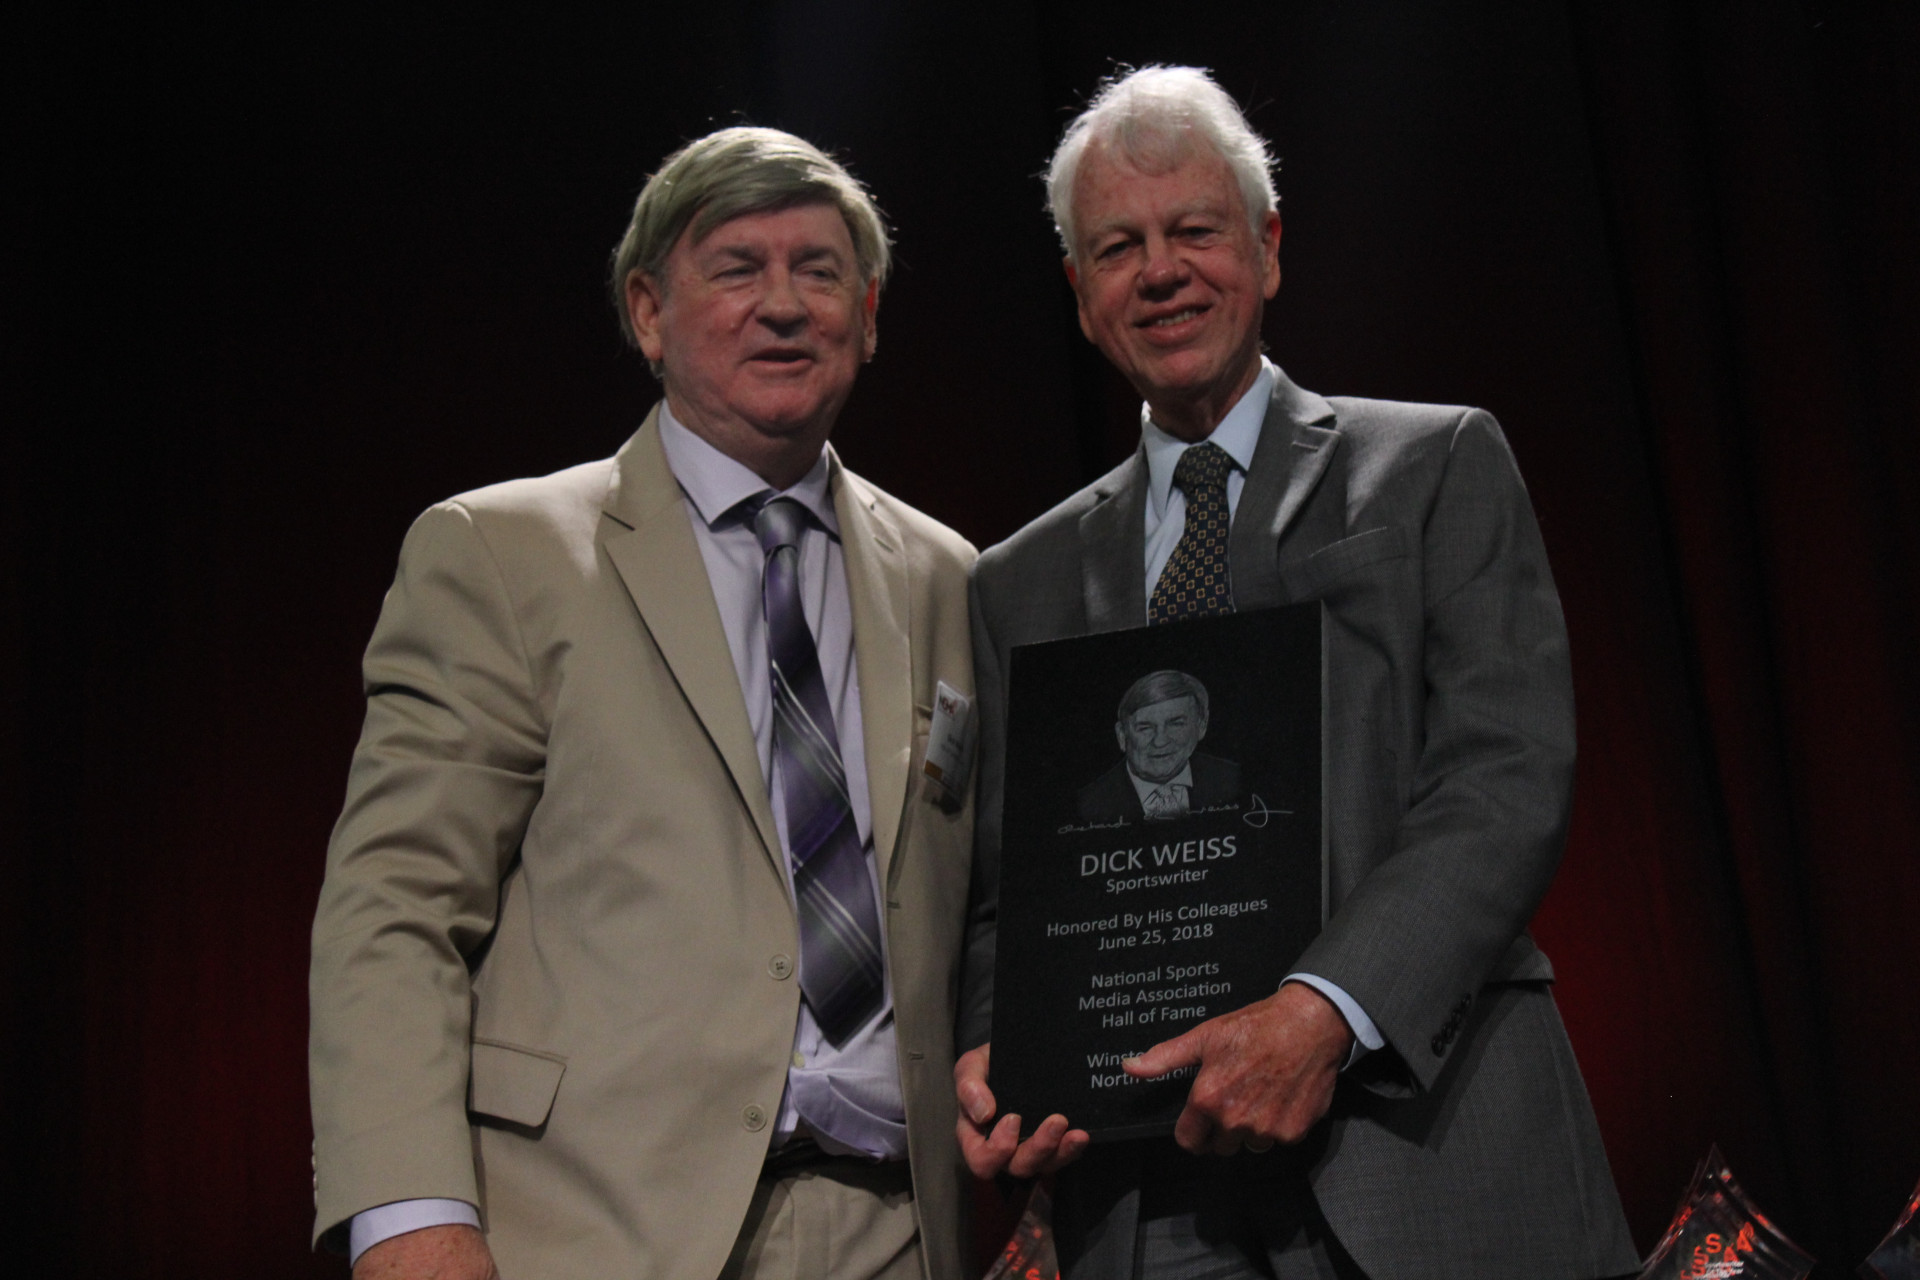 Dick Weiss (left) with his presenter and fellow NSMA Hall of Famer, Bob Ryan